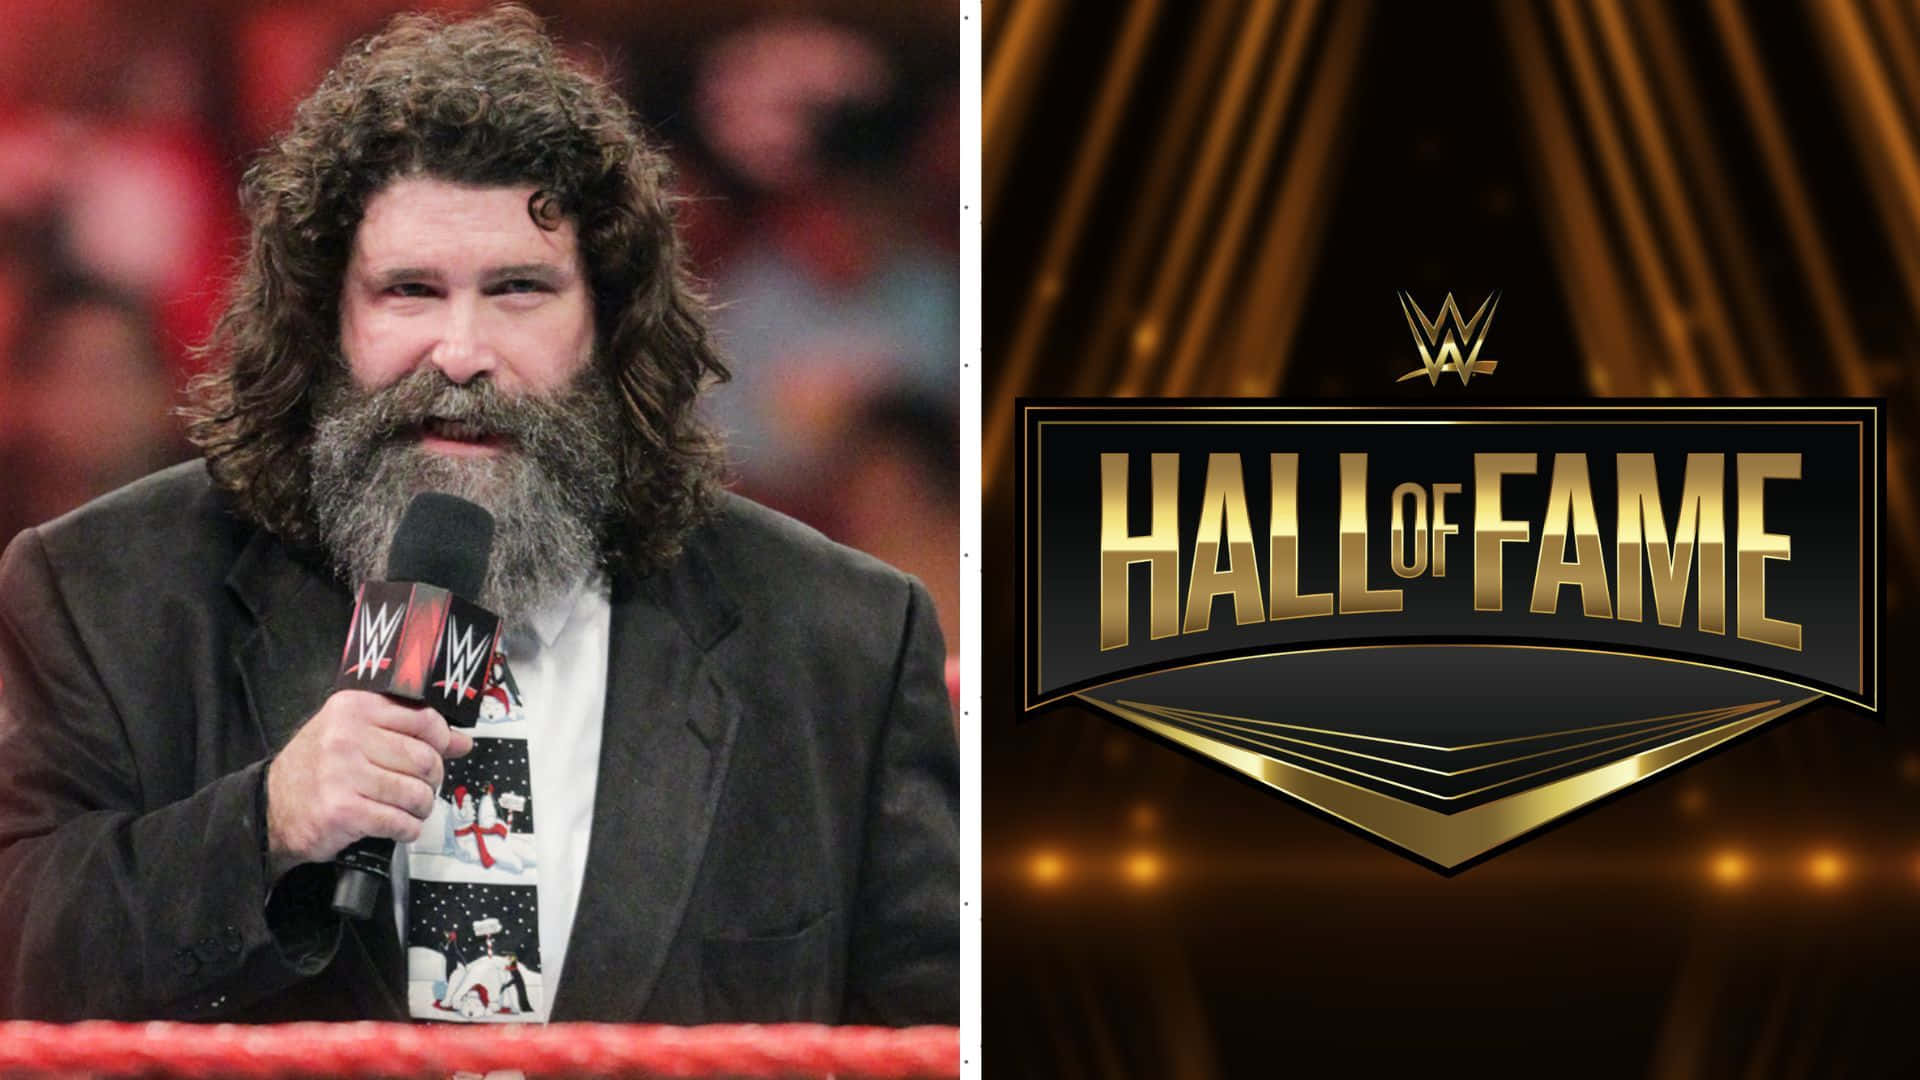 WWE Hall of Famer Mick Foley in action Wallpaper